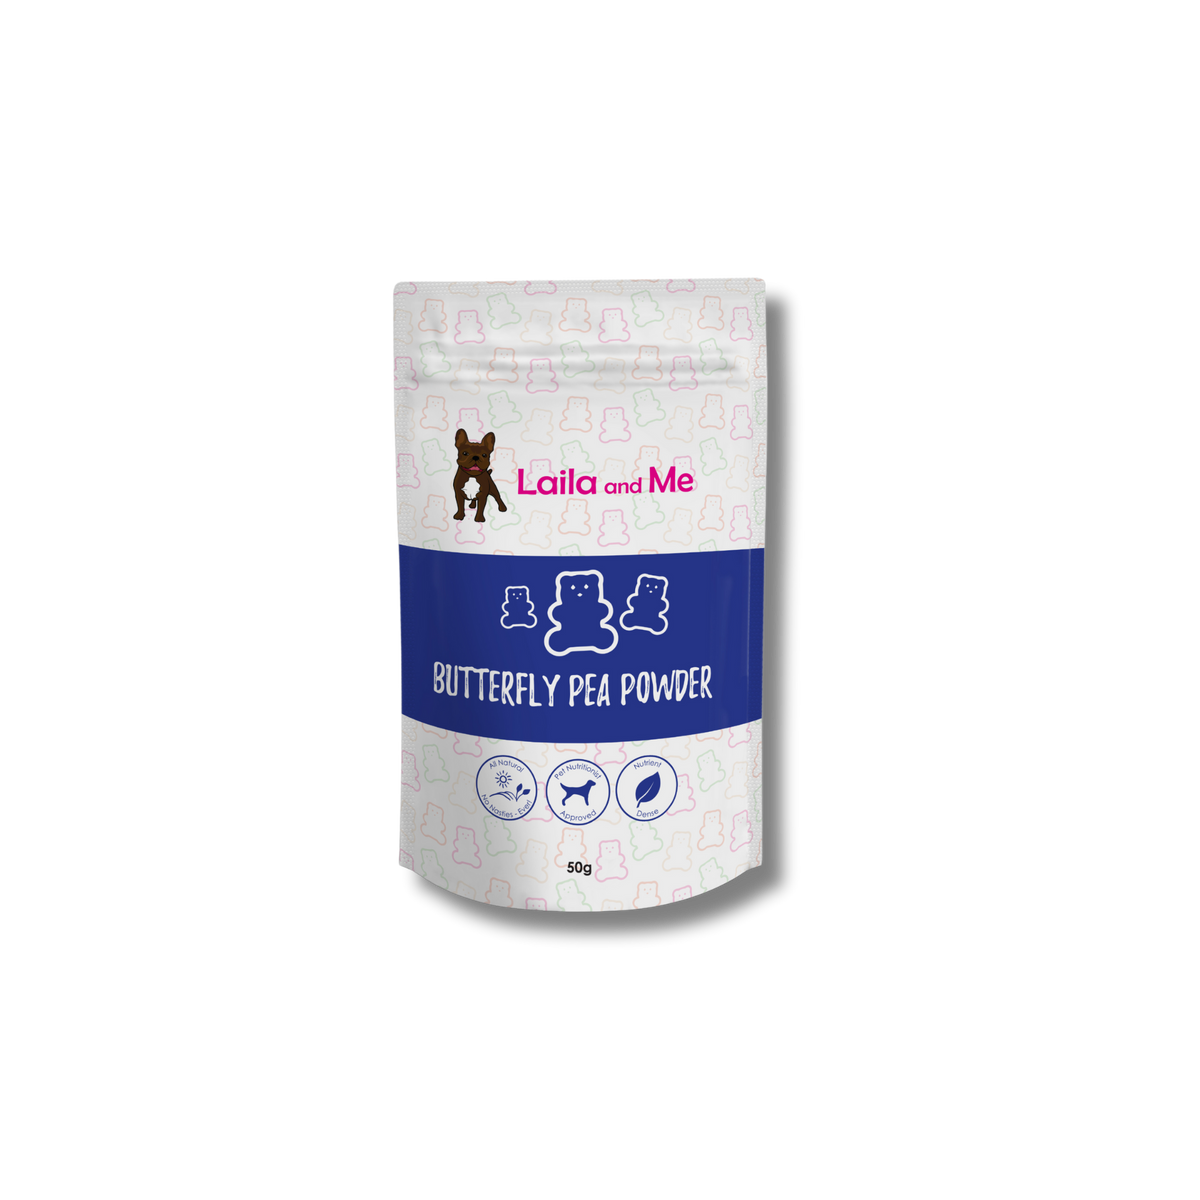 Butterfly Pea Powder for Dogs - Laila and Me